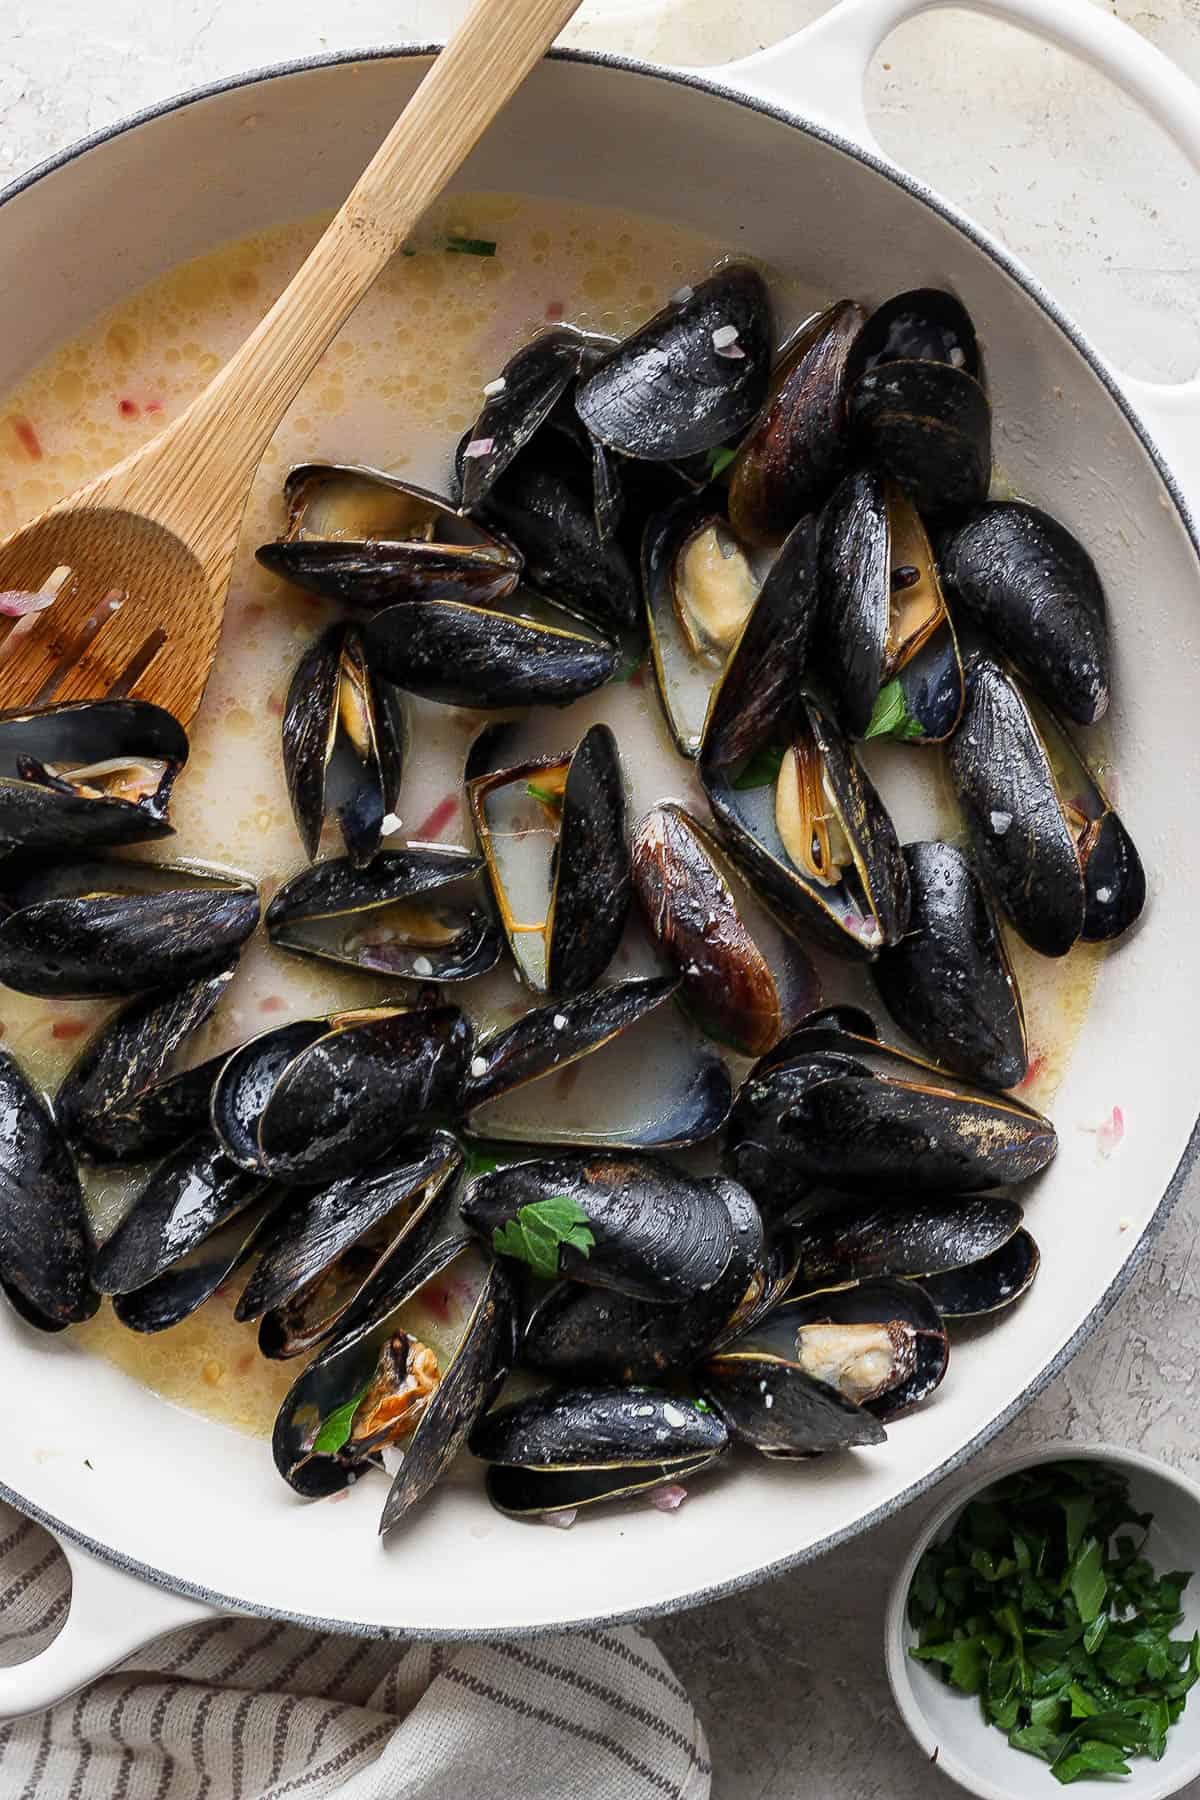 Mussels added to the pan of sauce.